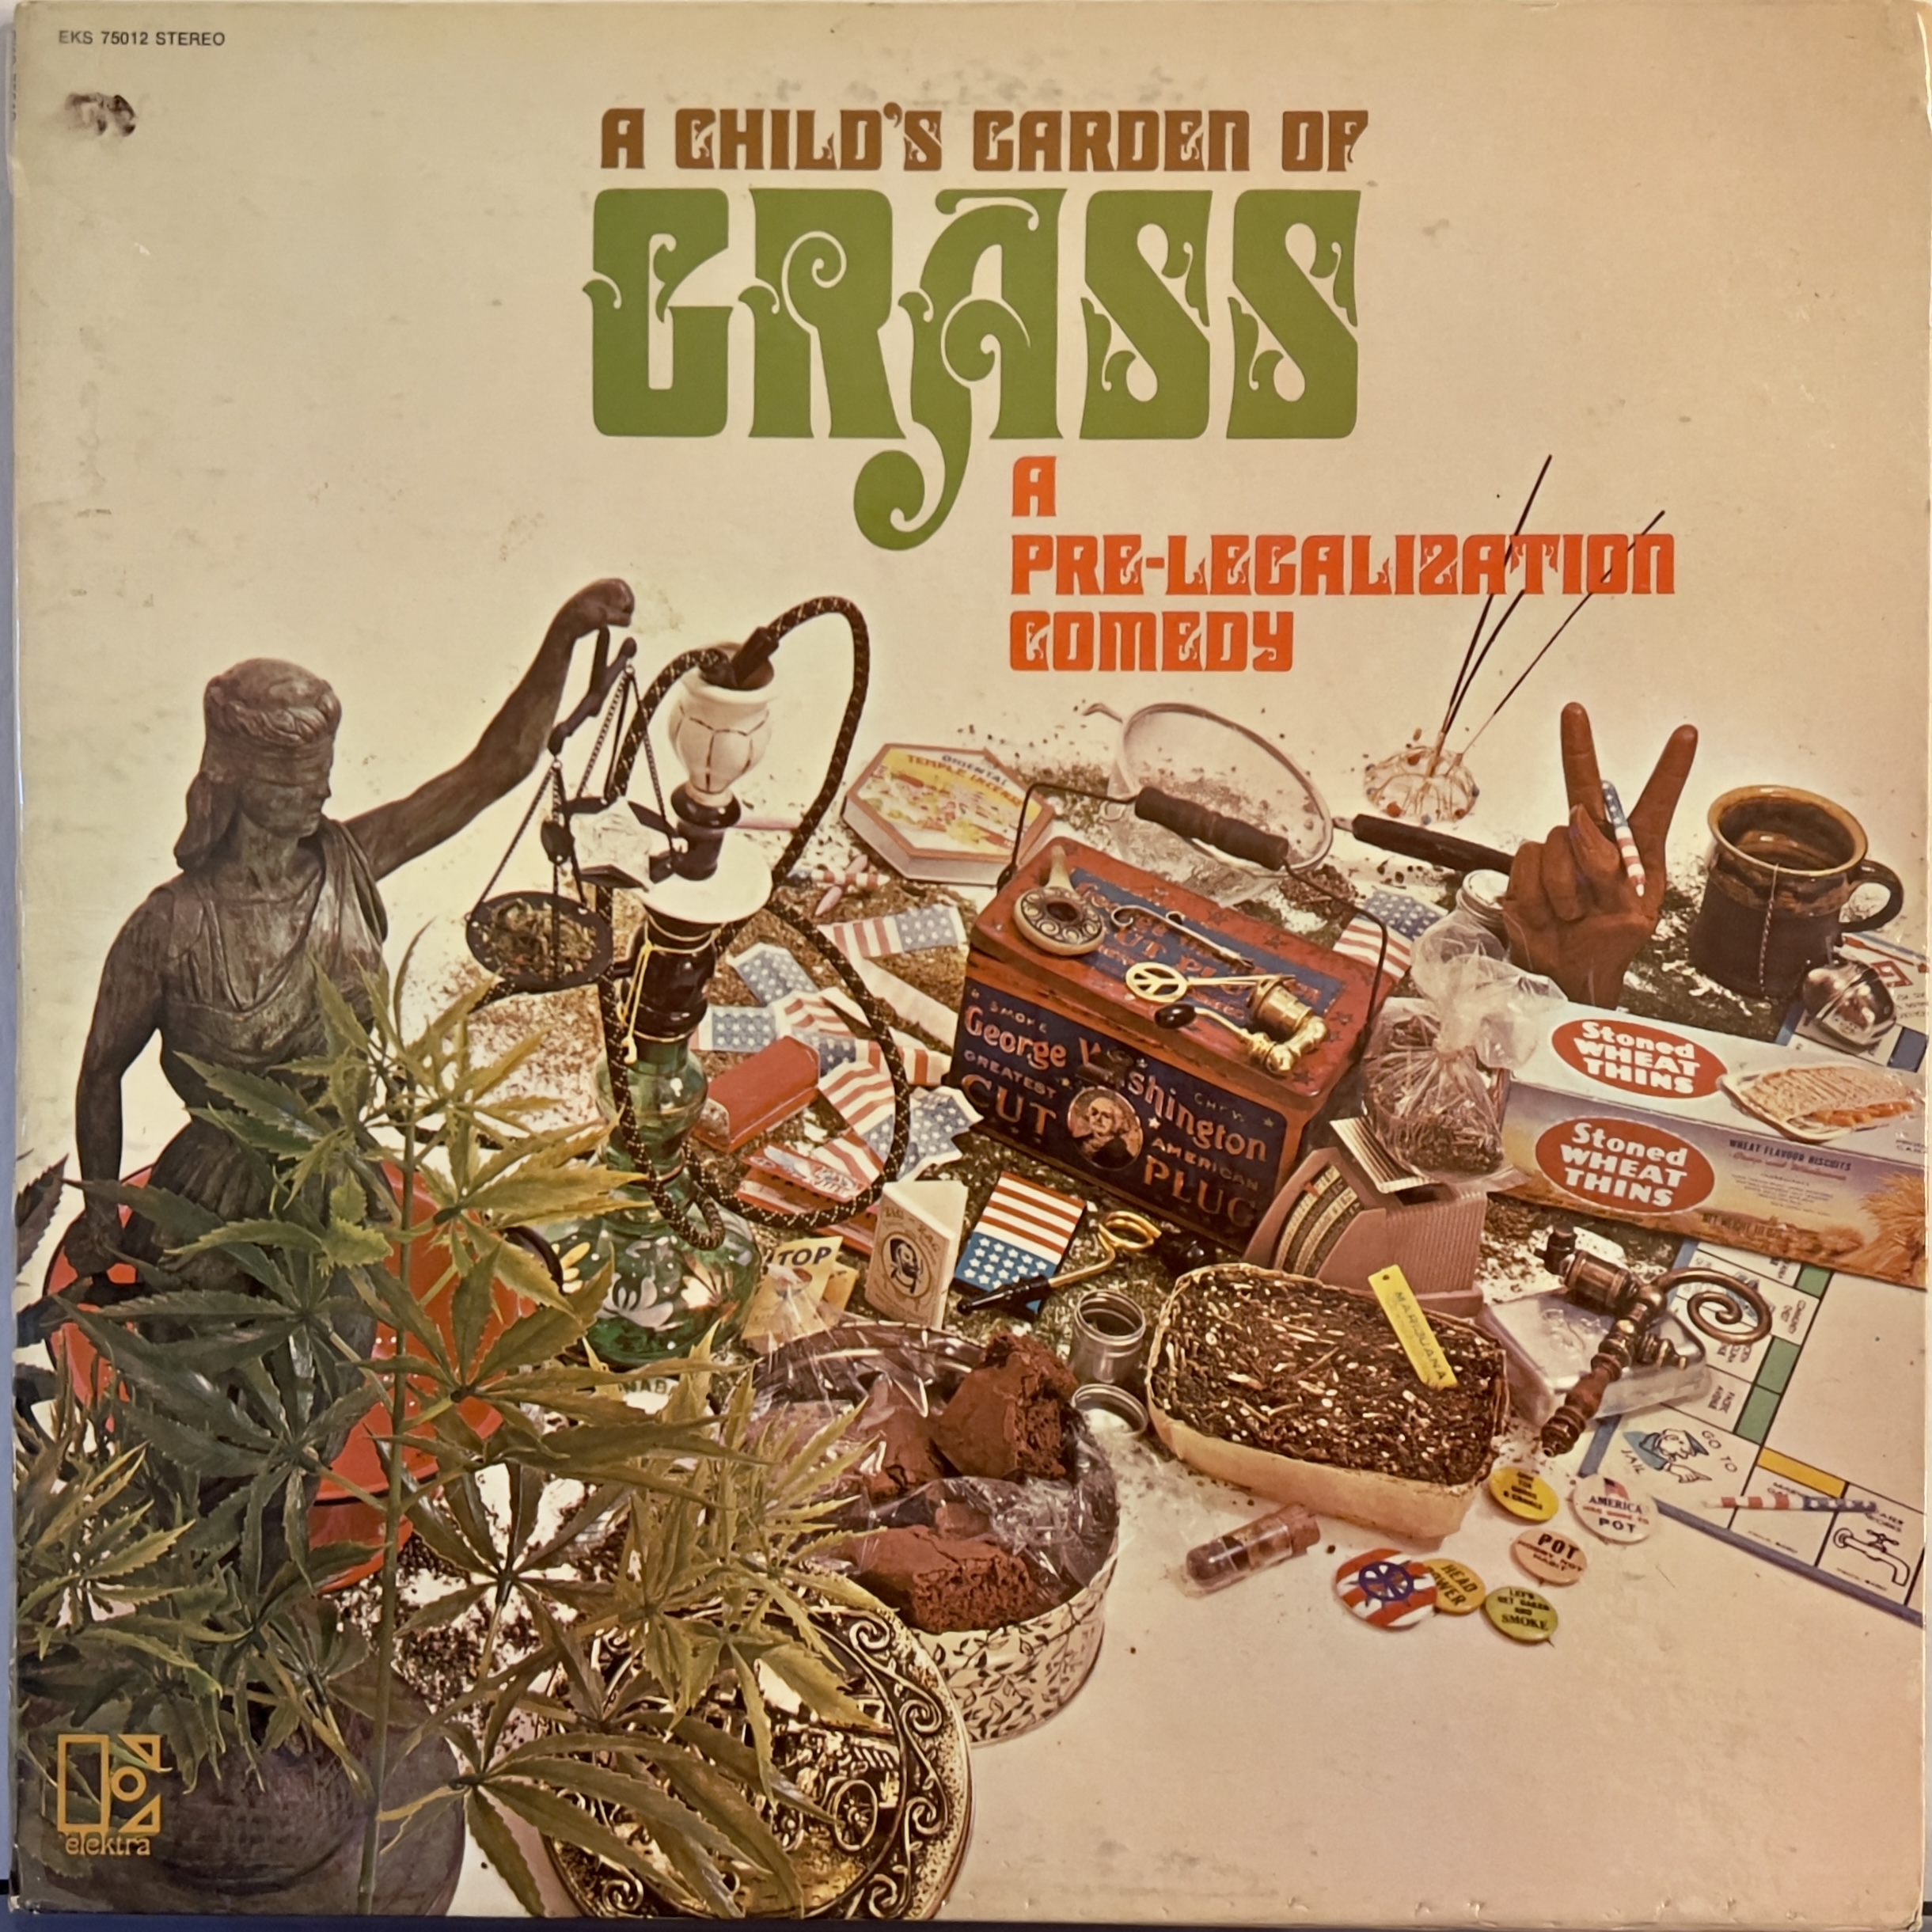 A Child's Garden of Grass: A Pre-Legalization Comedy by Jack S. Margolis